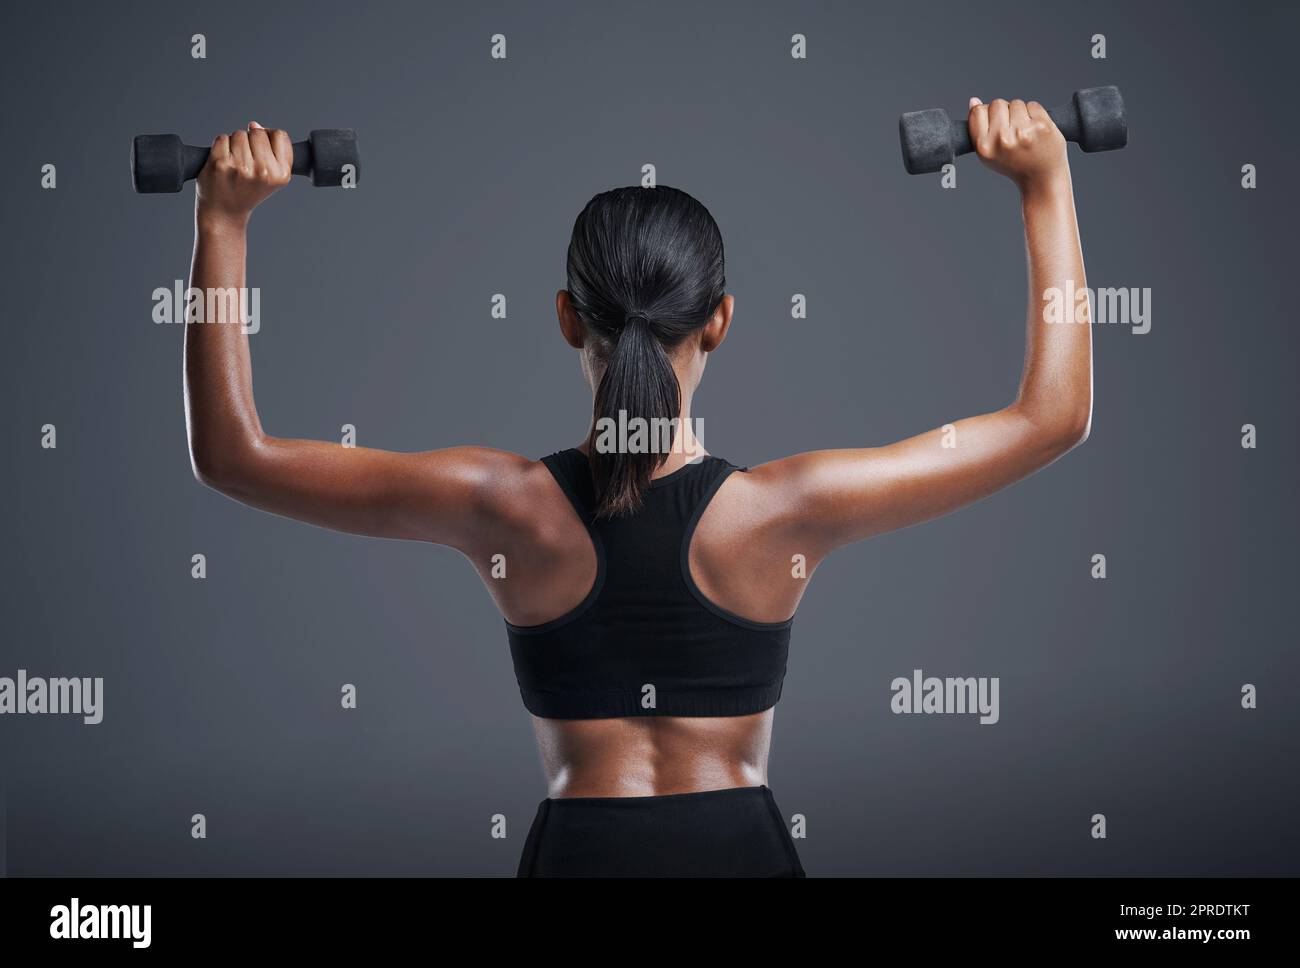 https://c8.alamy.com/comp/2PRDTKT/tone-those-arms-studio-shot-of-a-sporty-young-woman-lifting-weights-against-a-grey-background-2PRDTKT.jpg